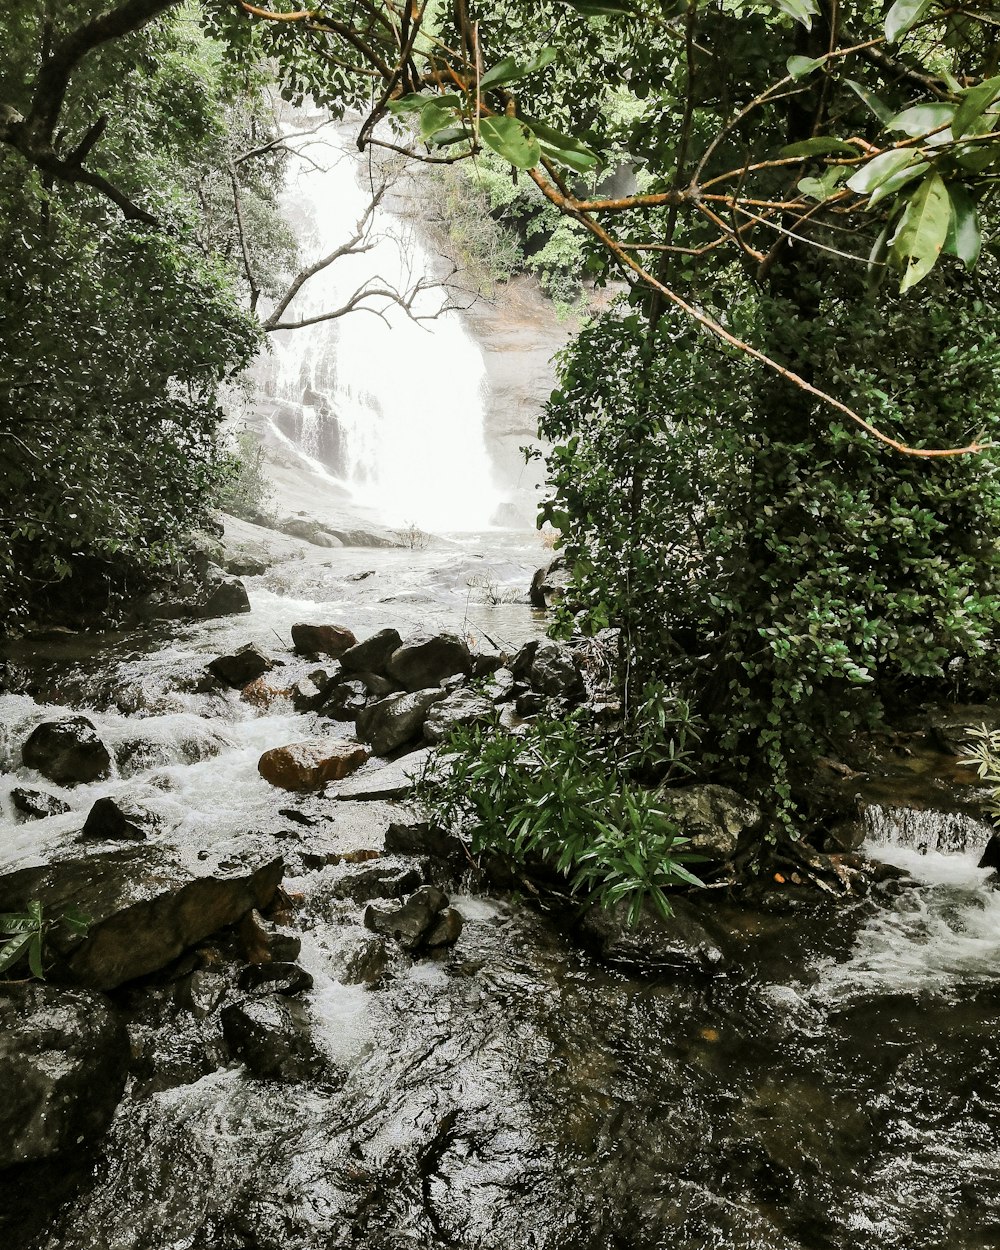 waterfalls near trees during day